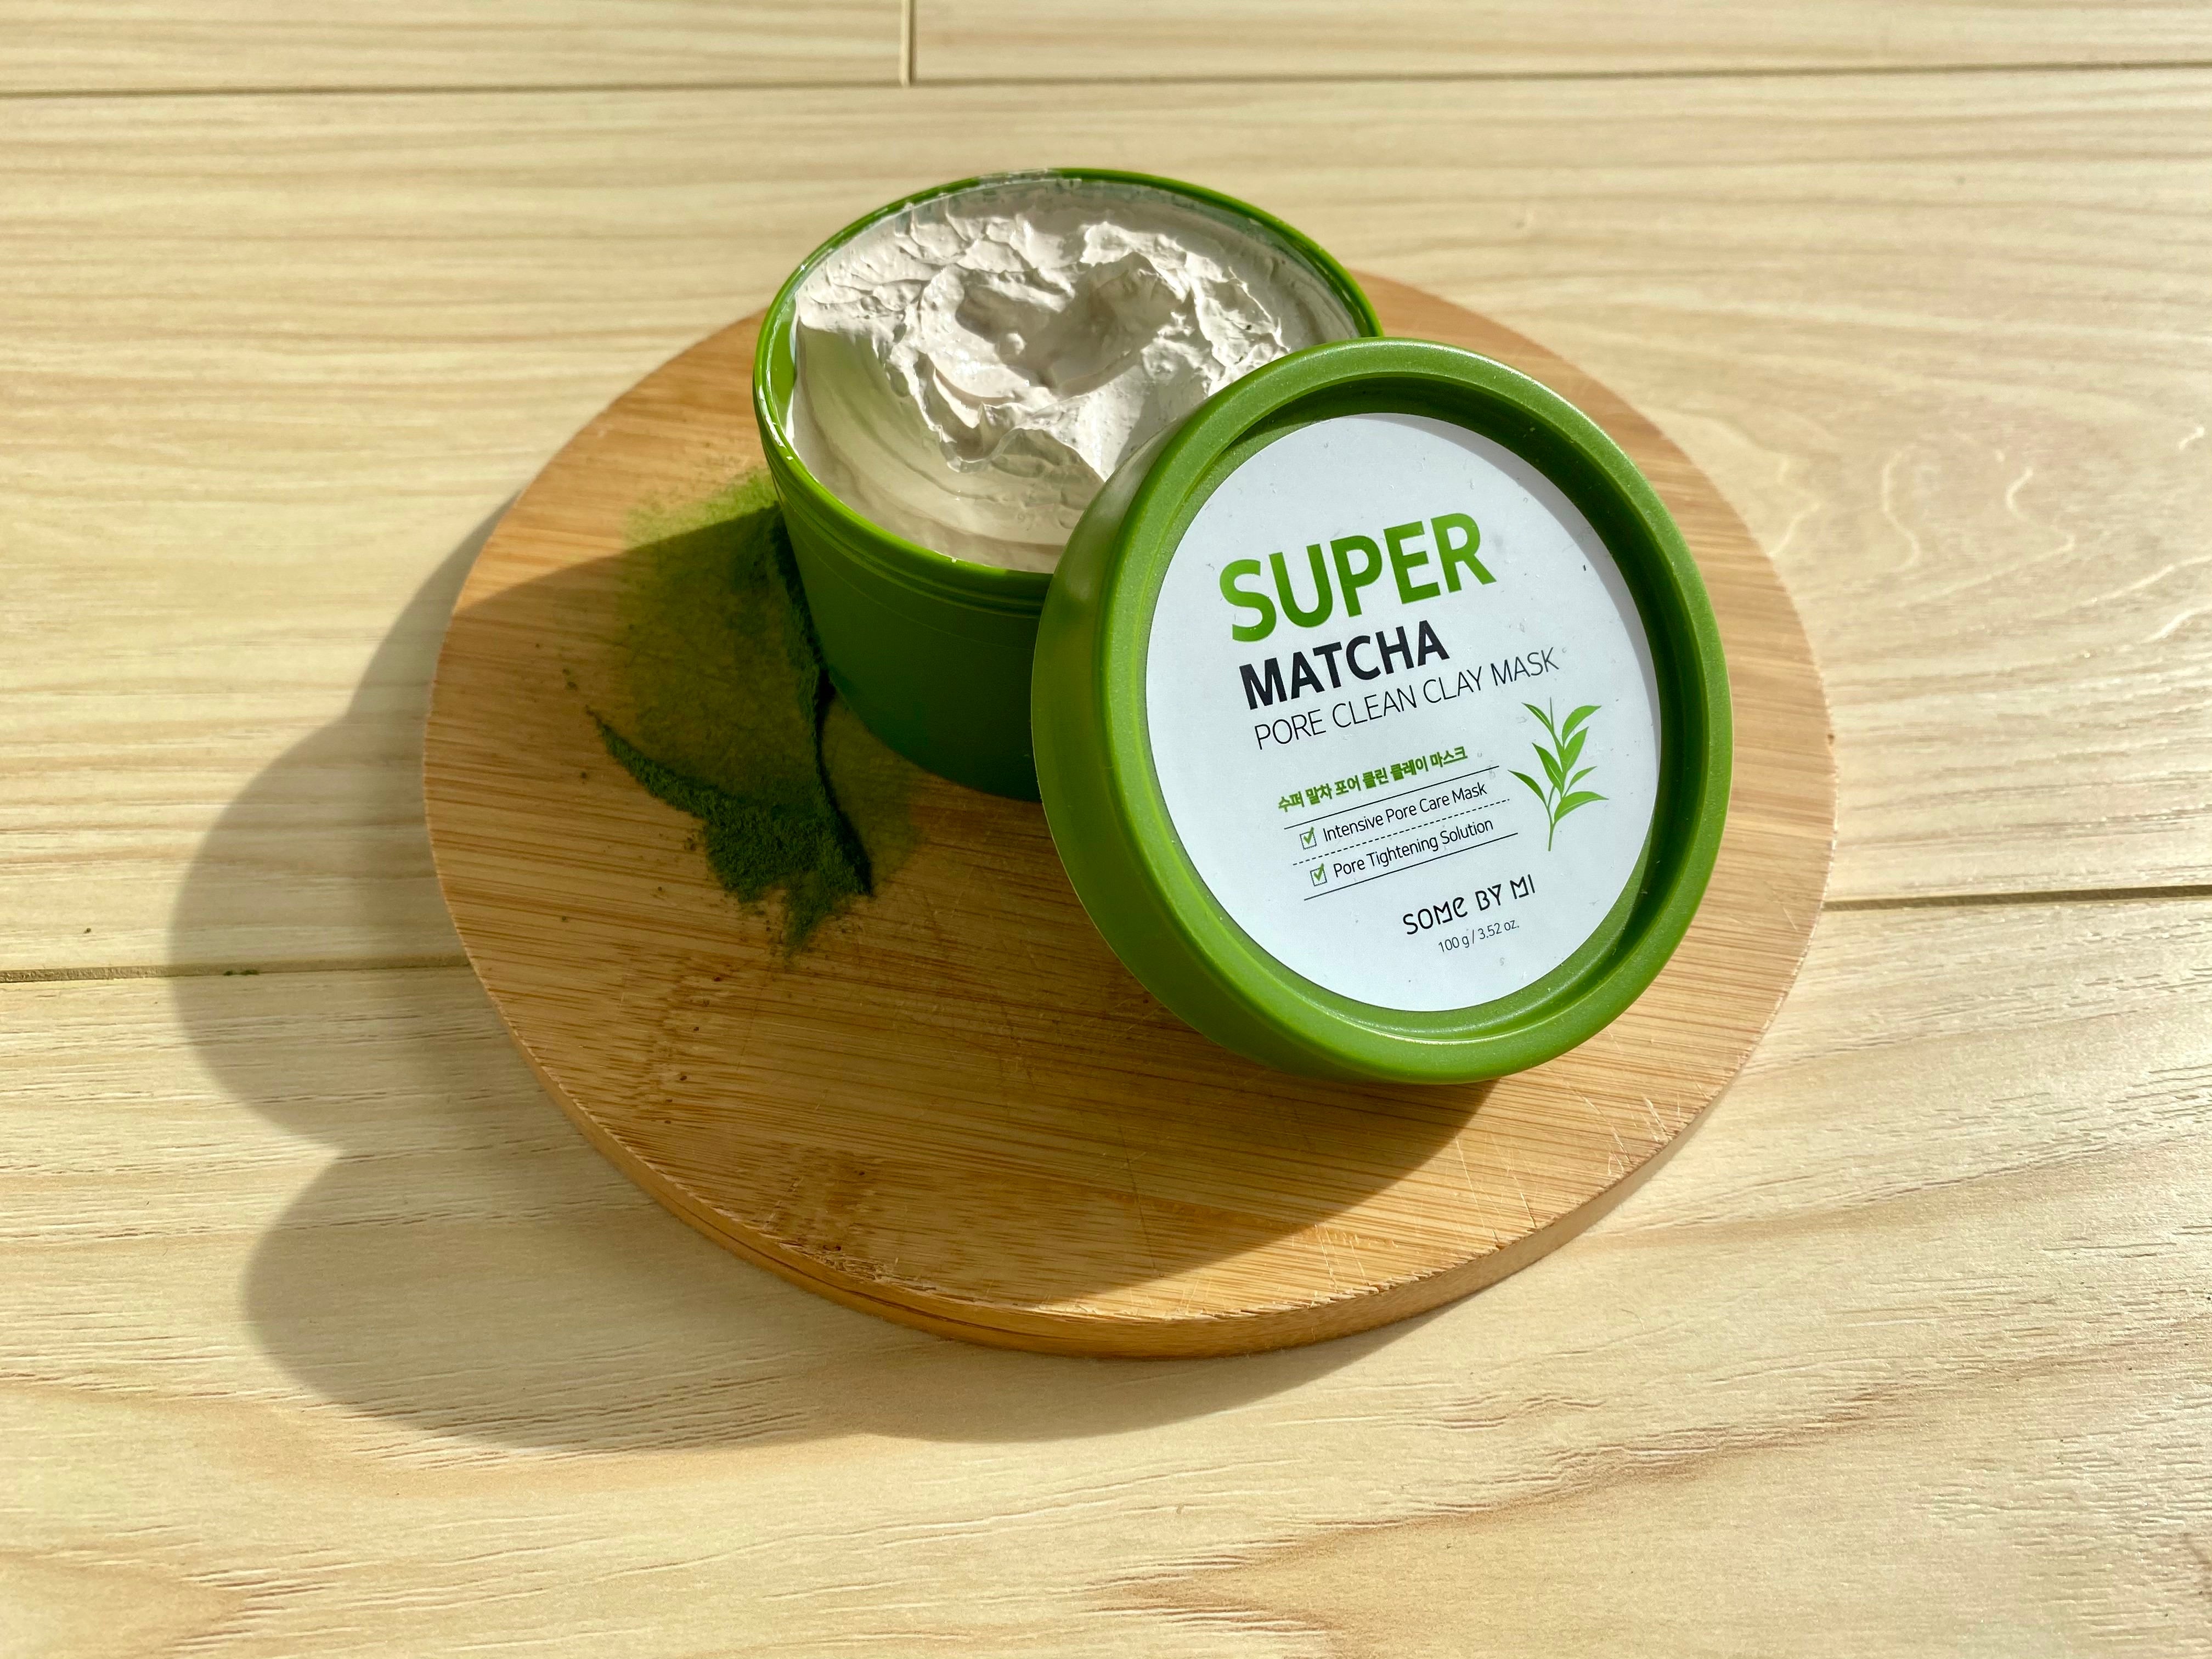 HI-REVIEW: SOME BY MI Super Matcha Pore Clean Clay Mask